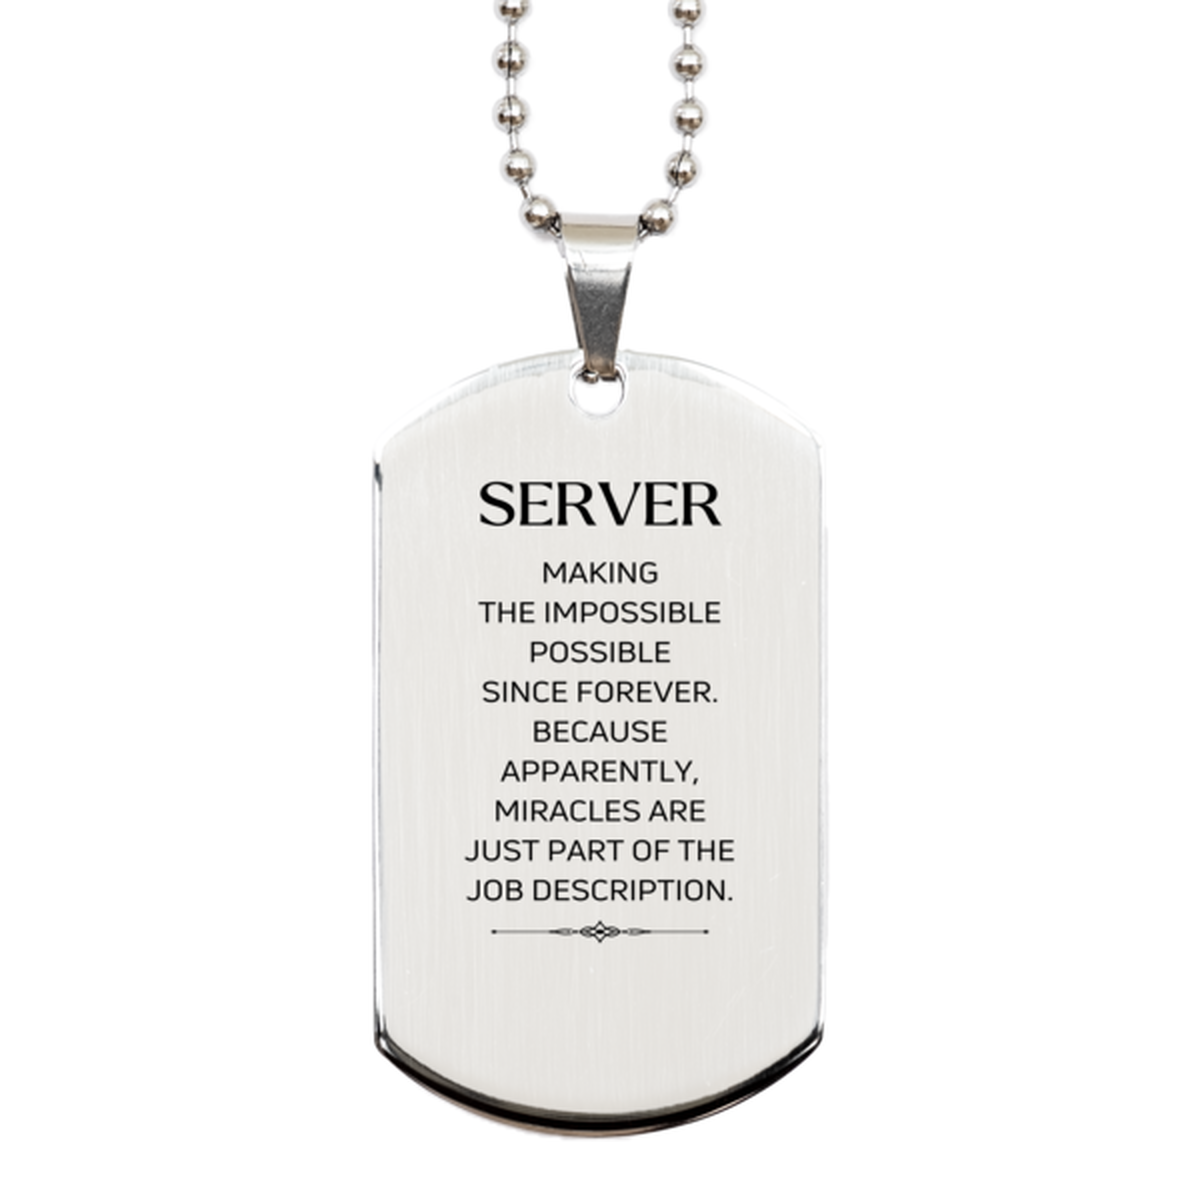 Funny Server Gifts, Miracles are just part of the job description, Inspirational Birthday Silver Dog Tag For Server, Men, Women, Coworkers, Friends, Boss